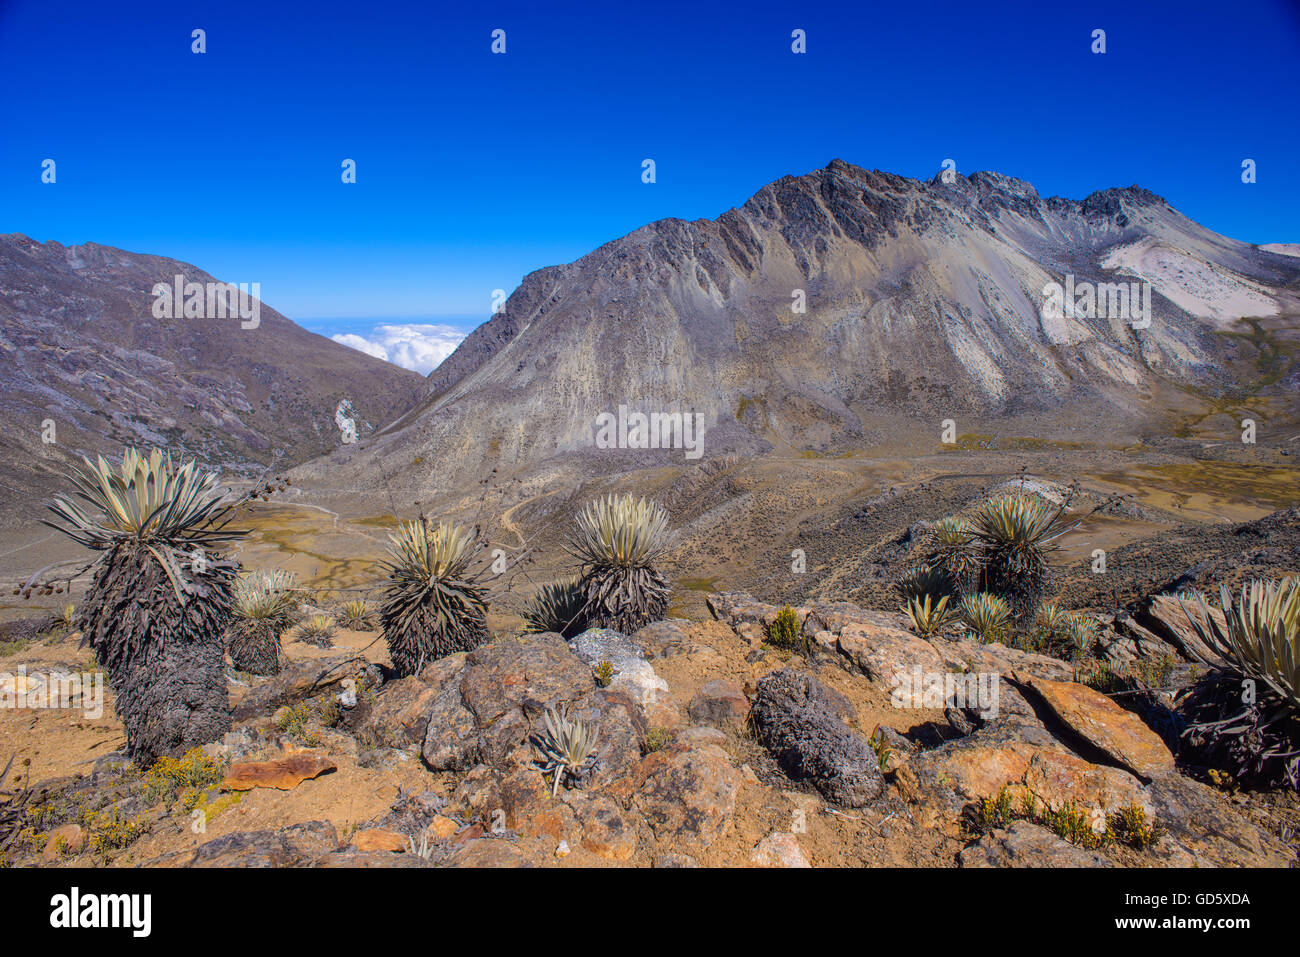 Landscapes high altitudes in the tropical Andes, Merida, Venezuela Stock Photo